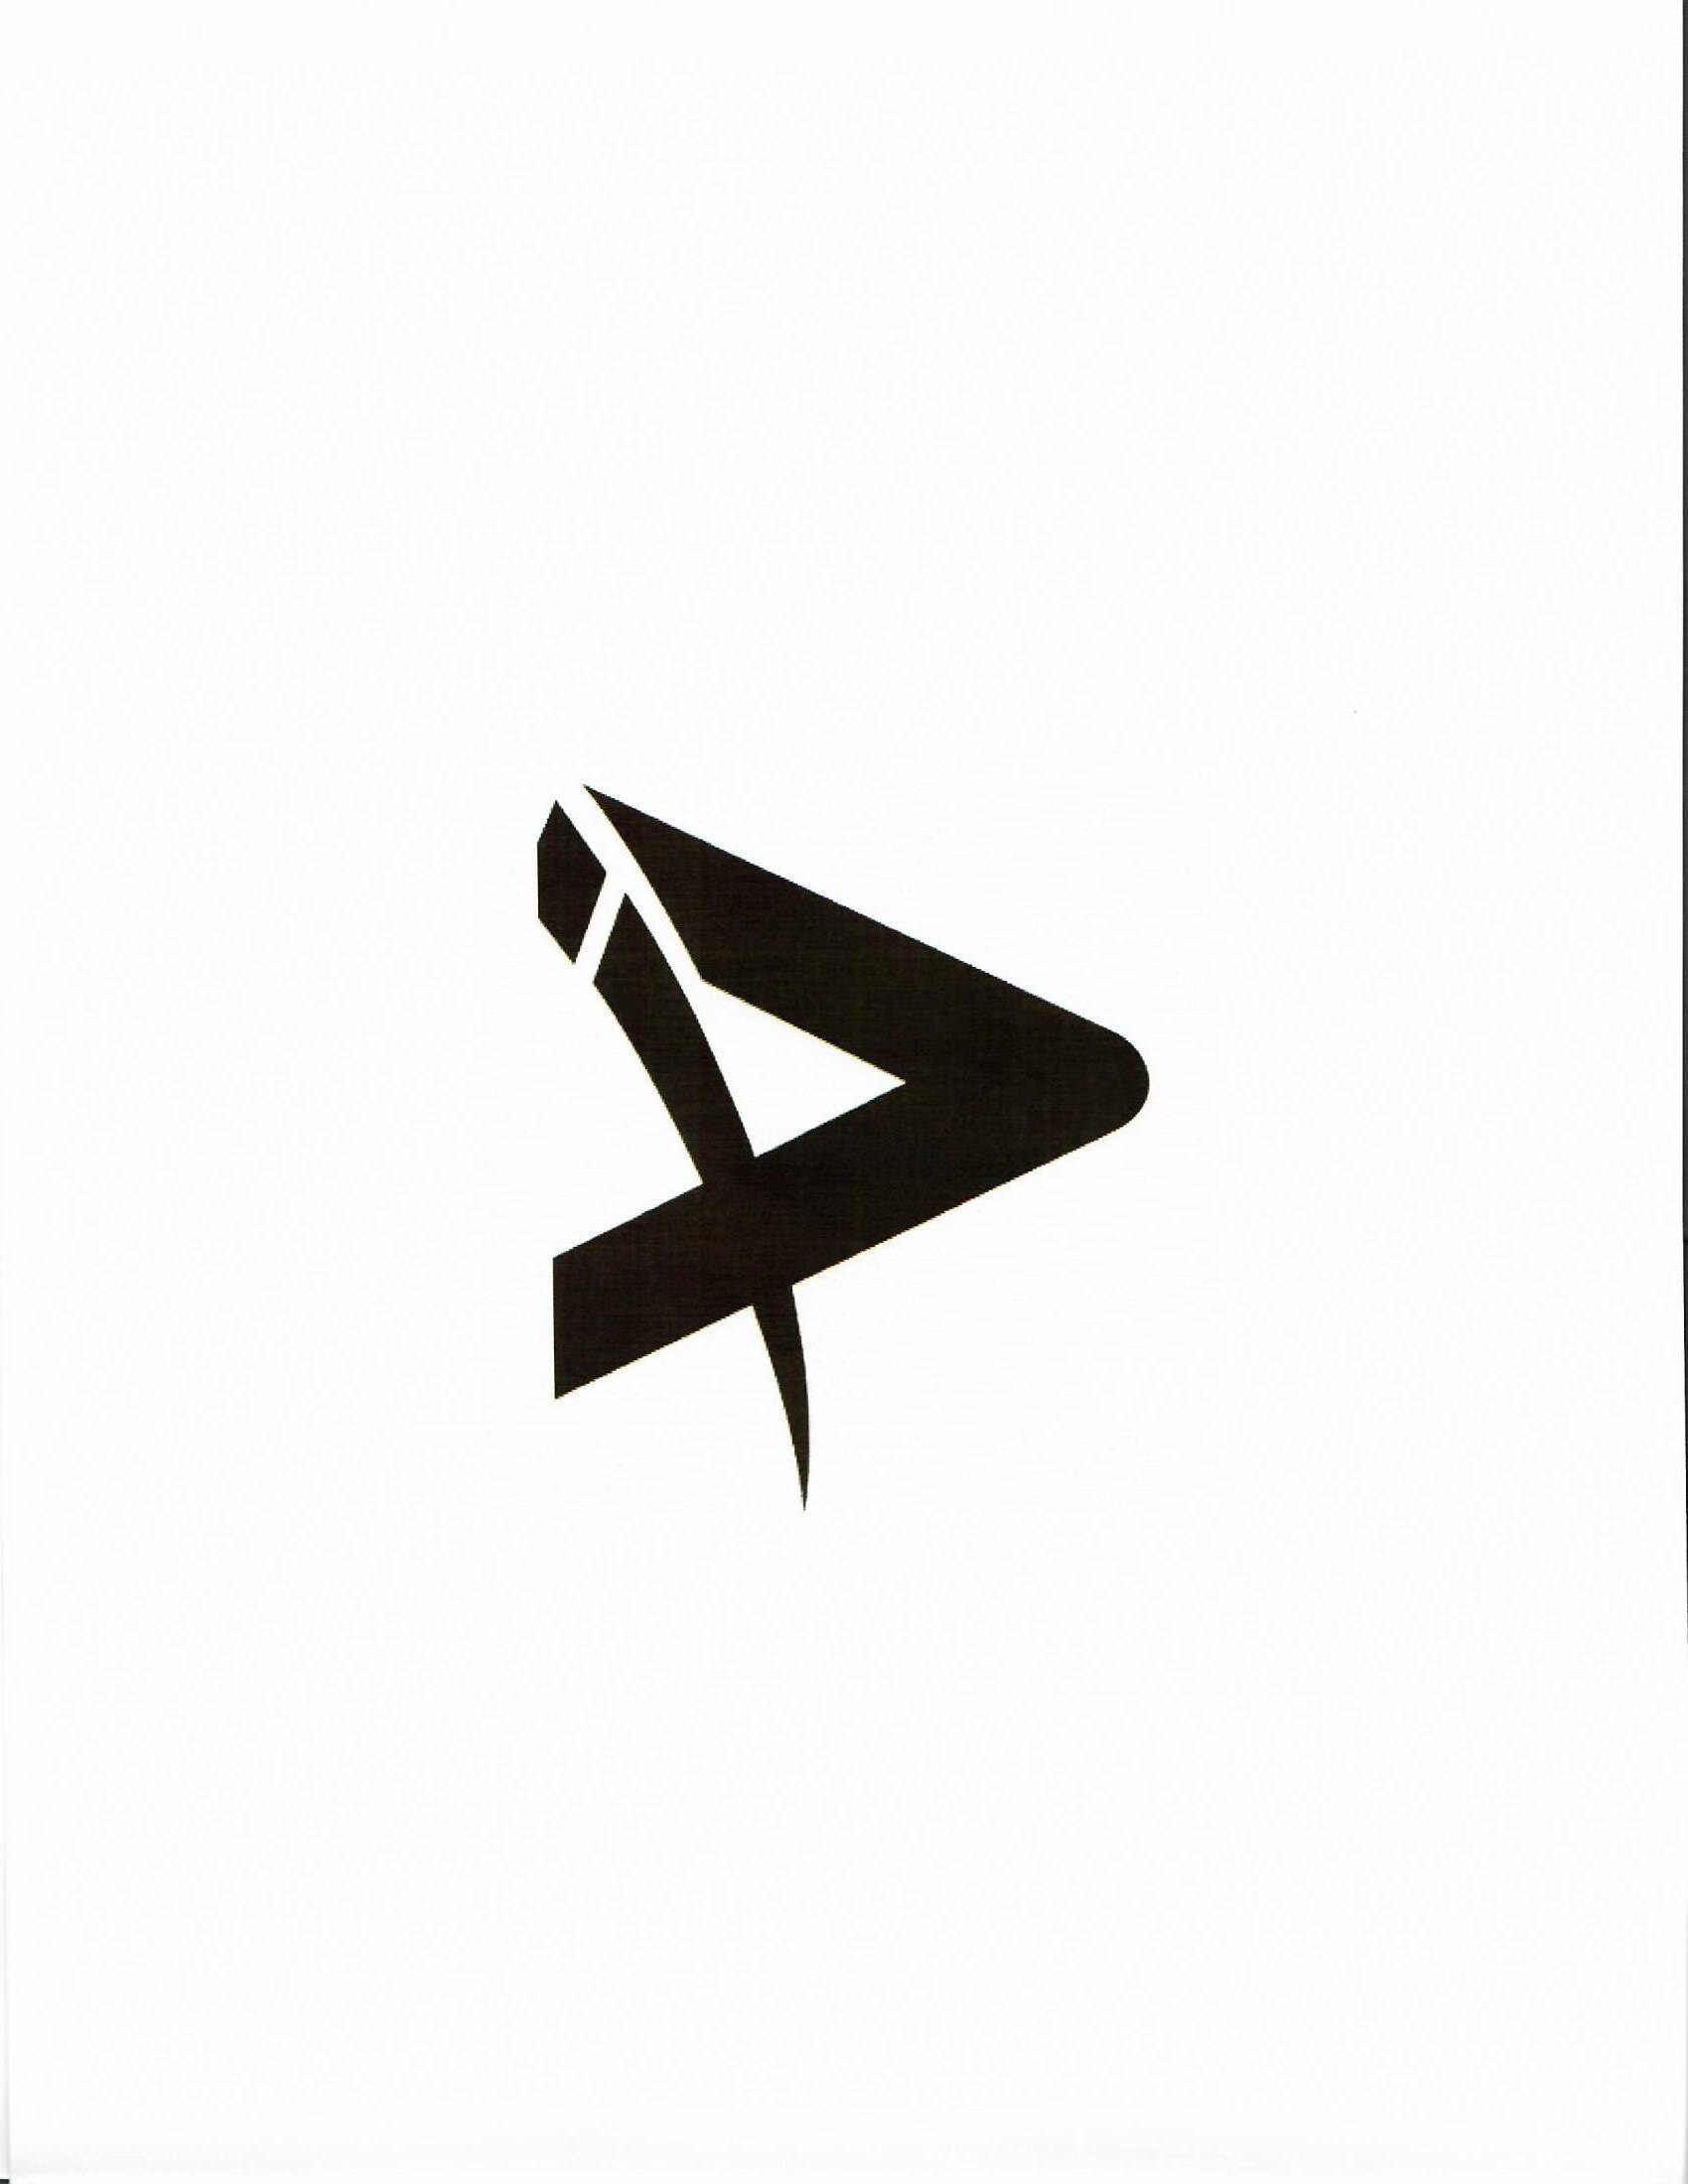  THE LETTER A ROTATED 90 DEGREES CLOCKWISE TO LOOK LIKE THE GREATER THAN SYMBOL (I.E., ))